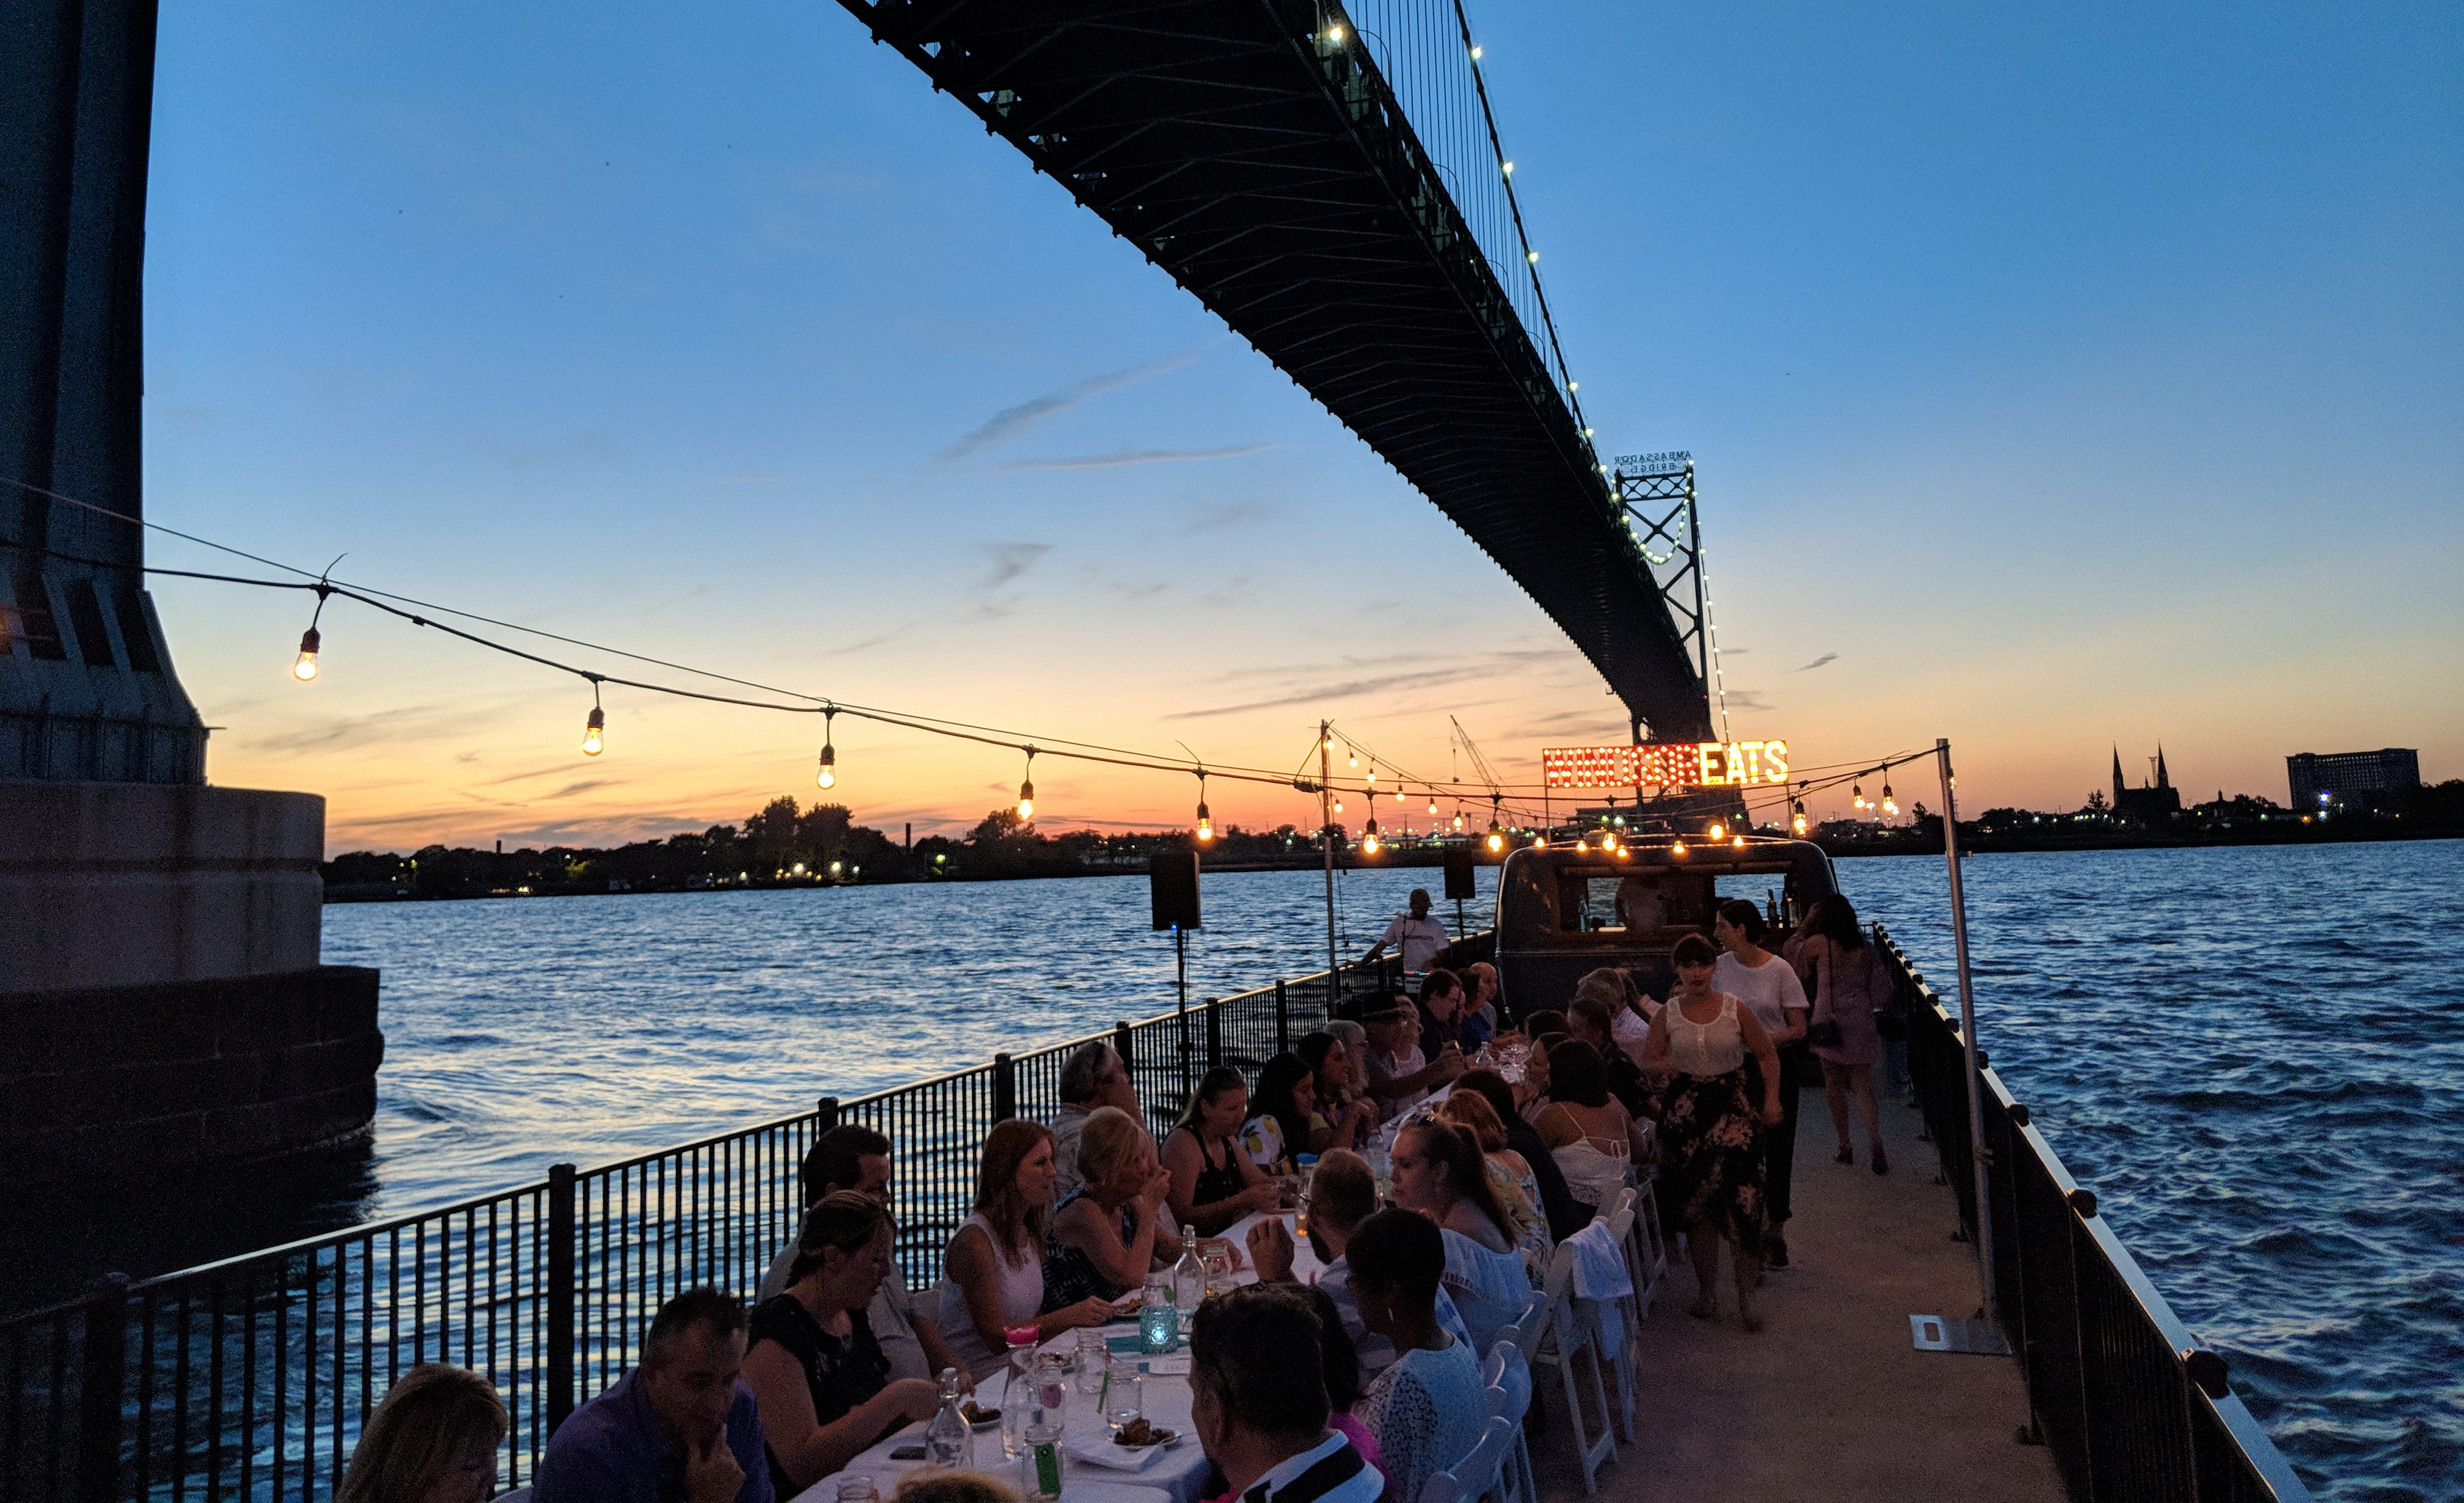 Dinner on a Pier is a spectacular experience in Windsor, Ontario, on the shores of the Detroit River.